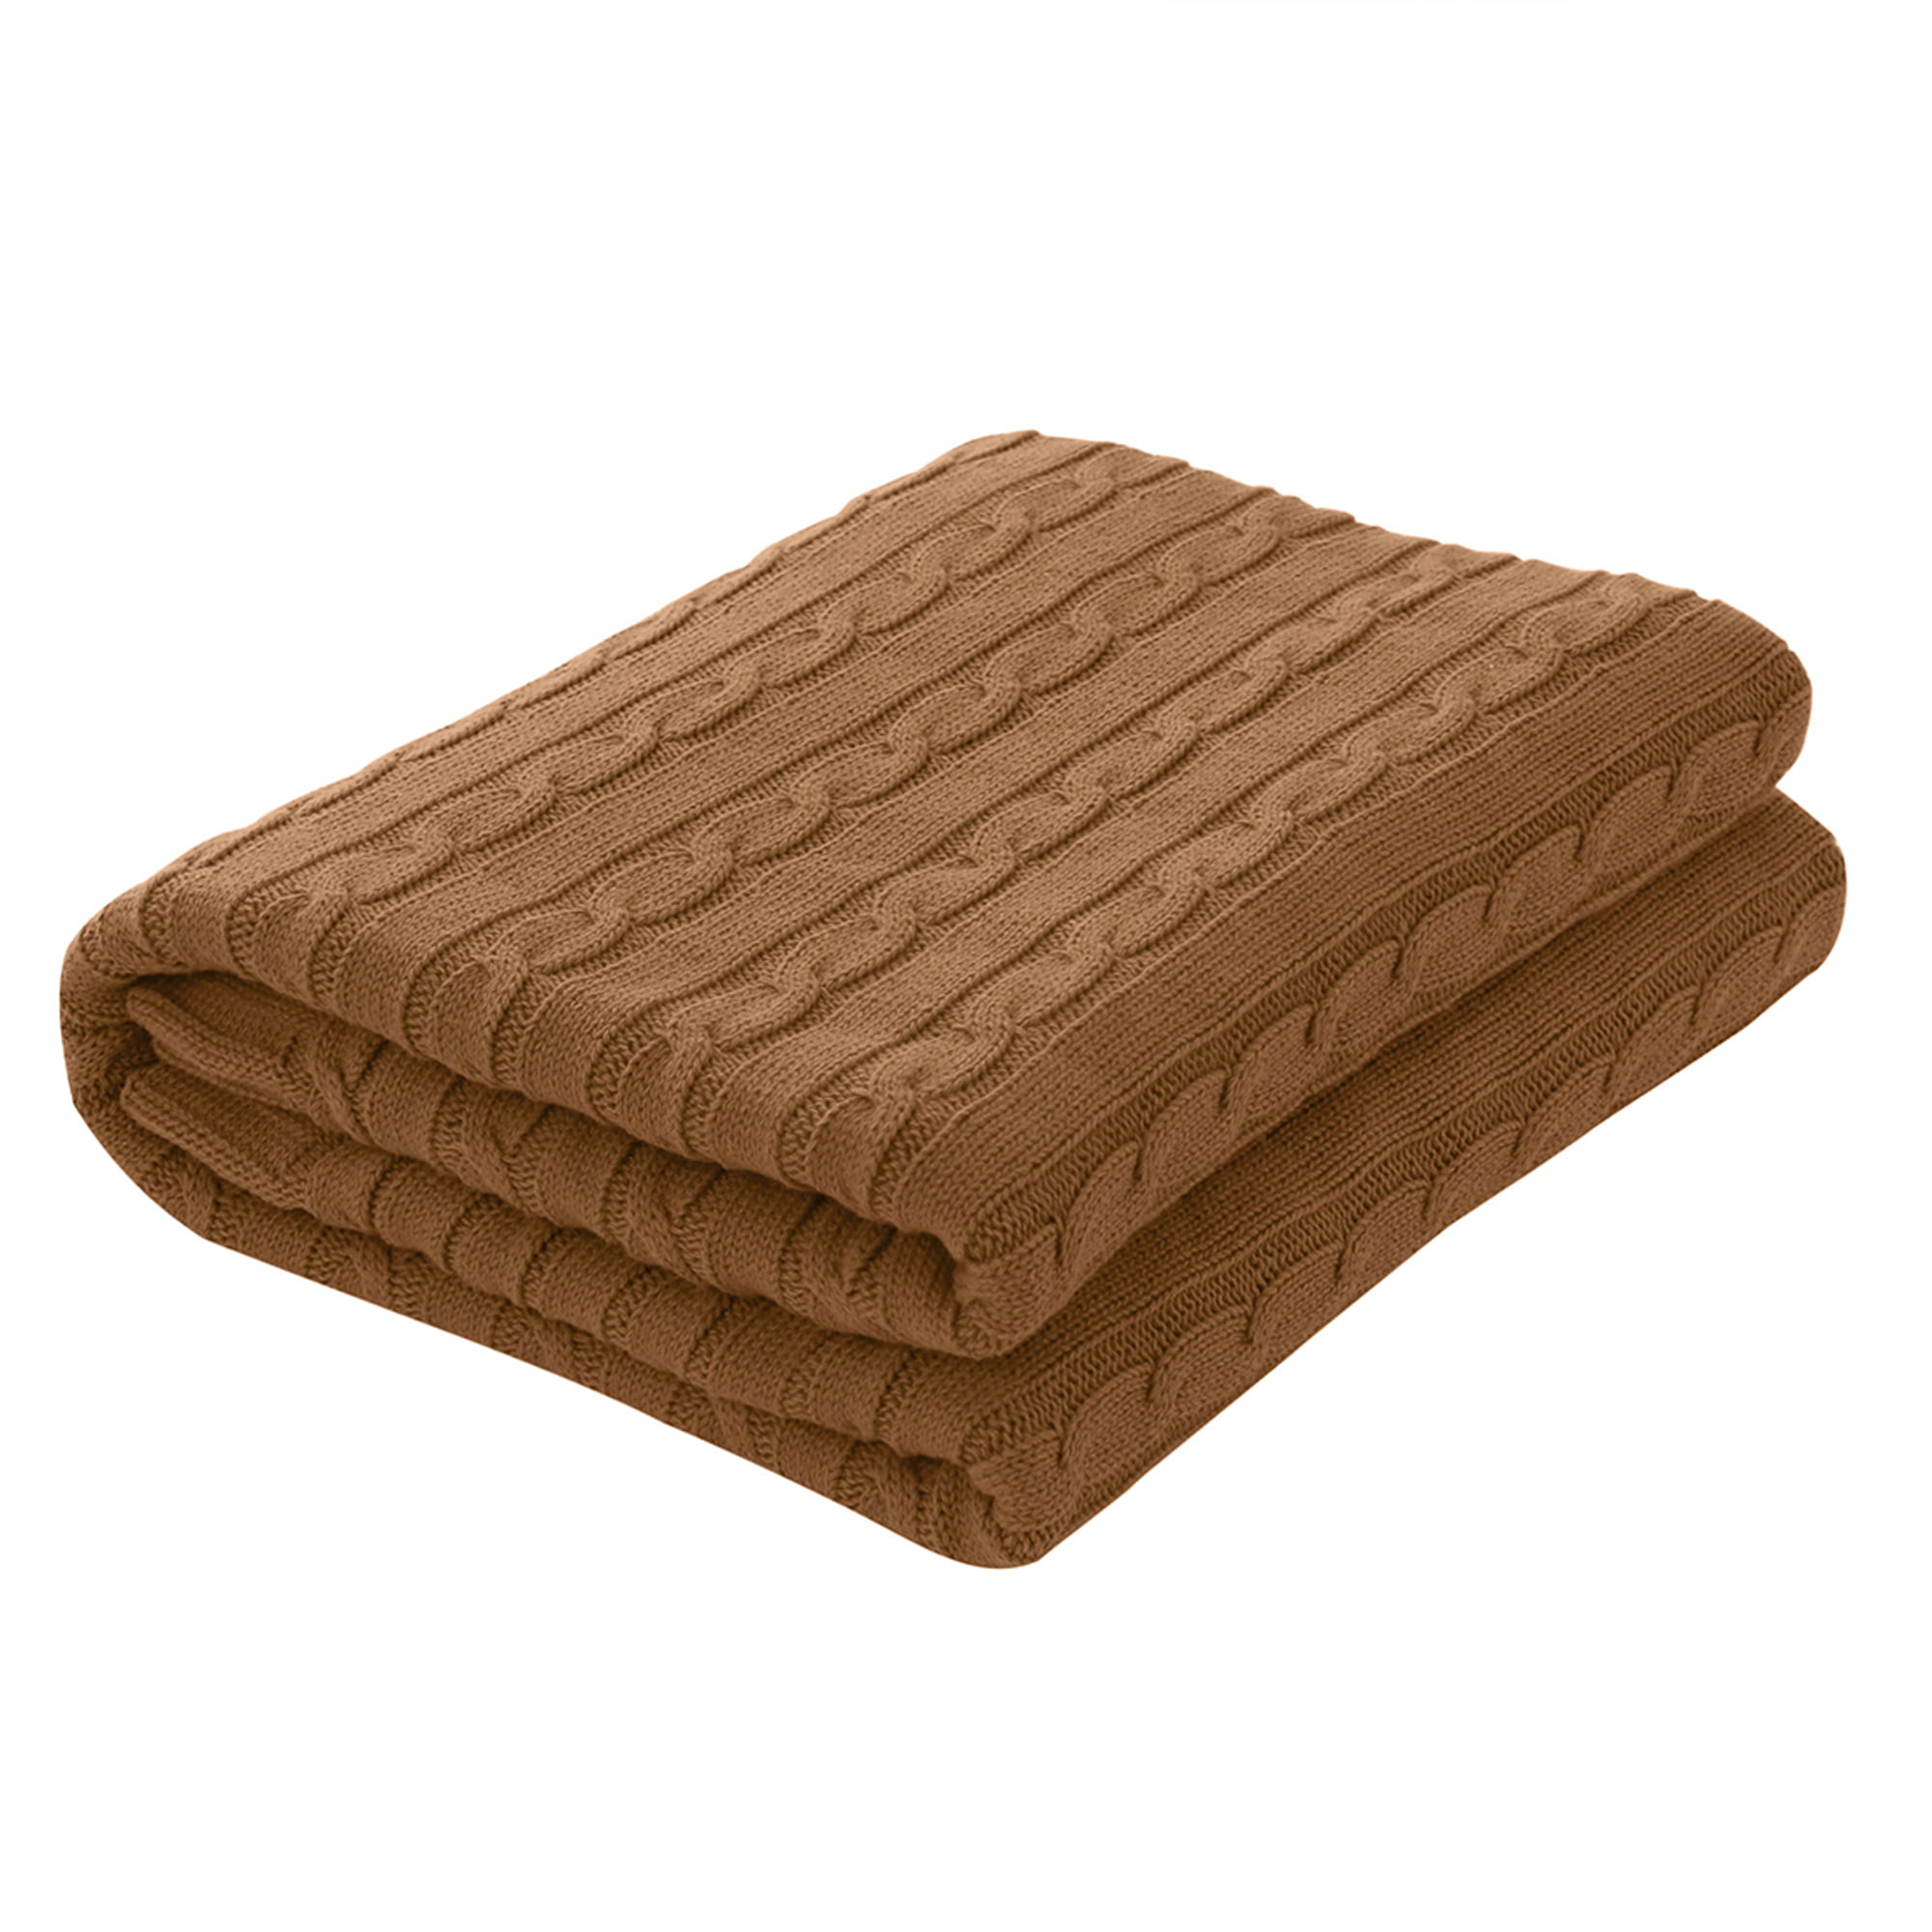 Details about   Knitted Waffle Throw Rug Blanket Super Soft Cotton Knitted Sofa Bed Home Decor 